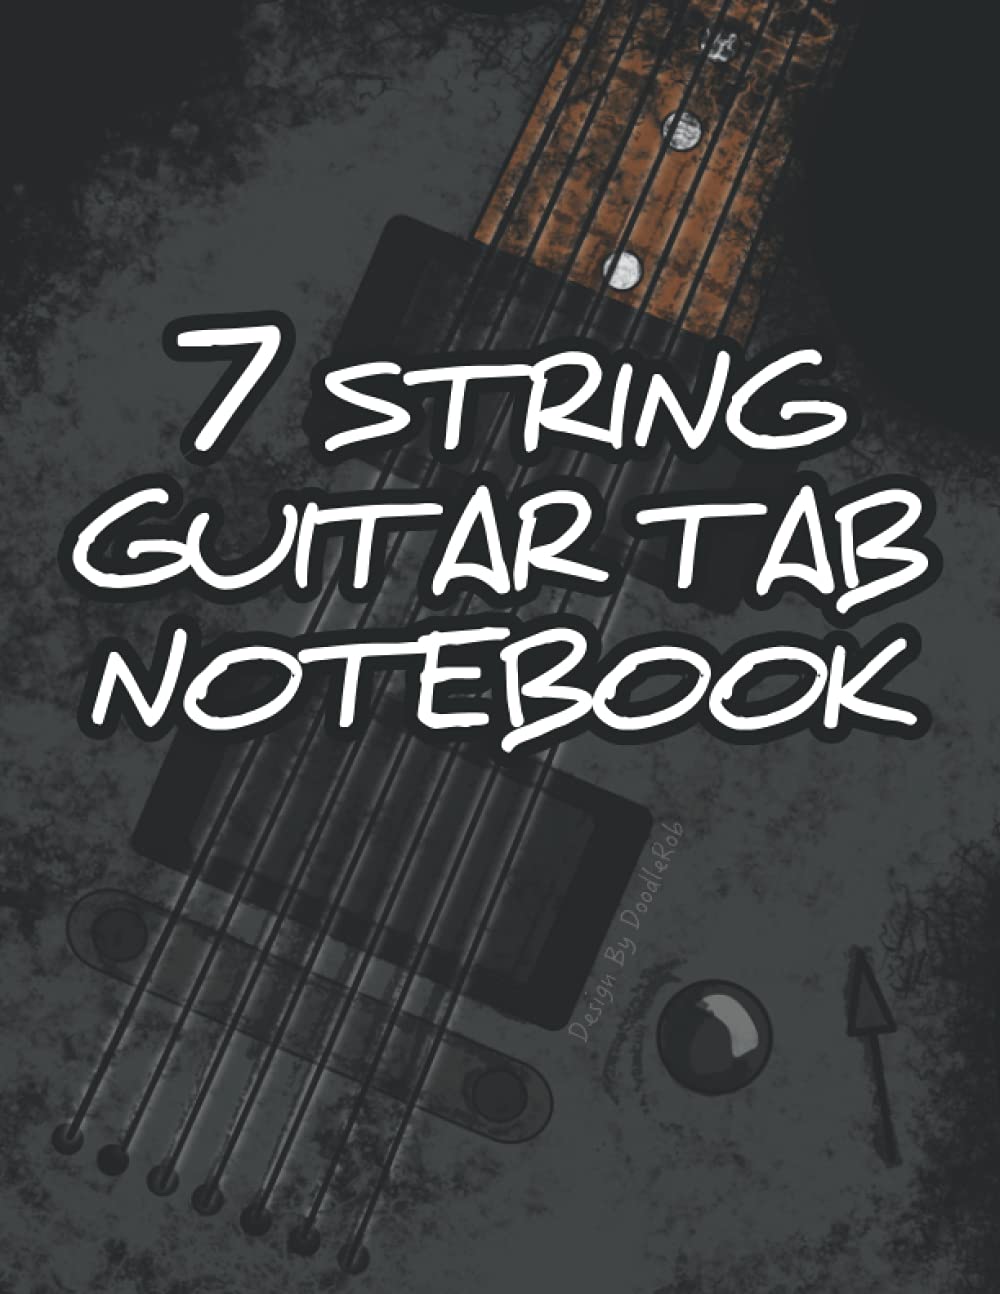 7 String Guitar Tab Notebook 7 String Guitar Tablature With 7